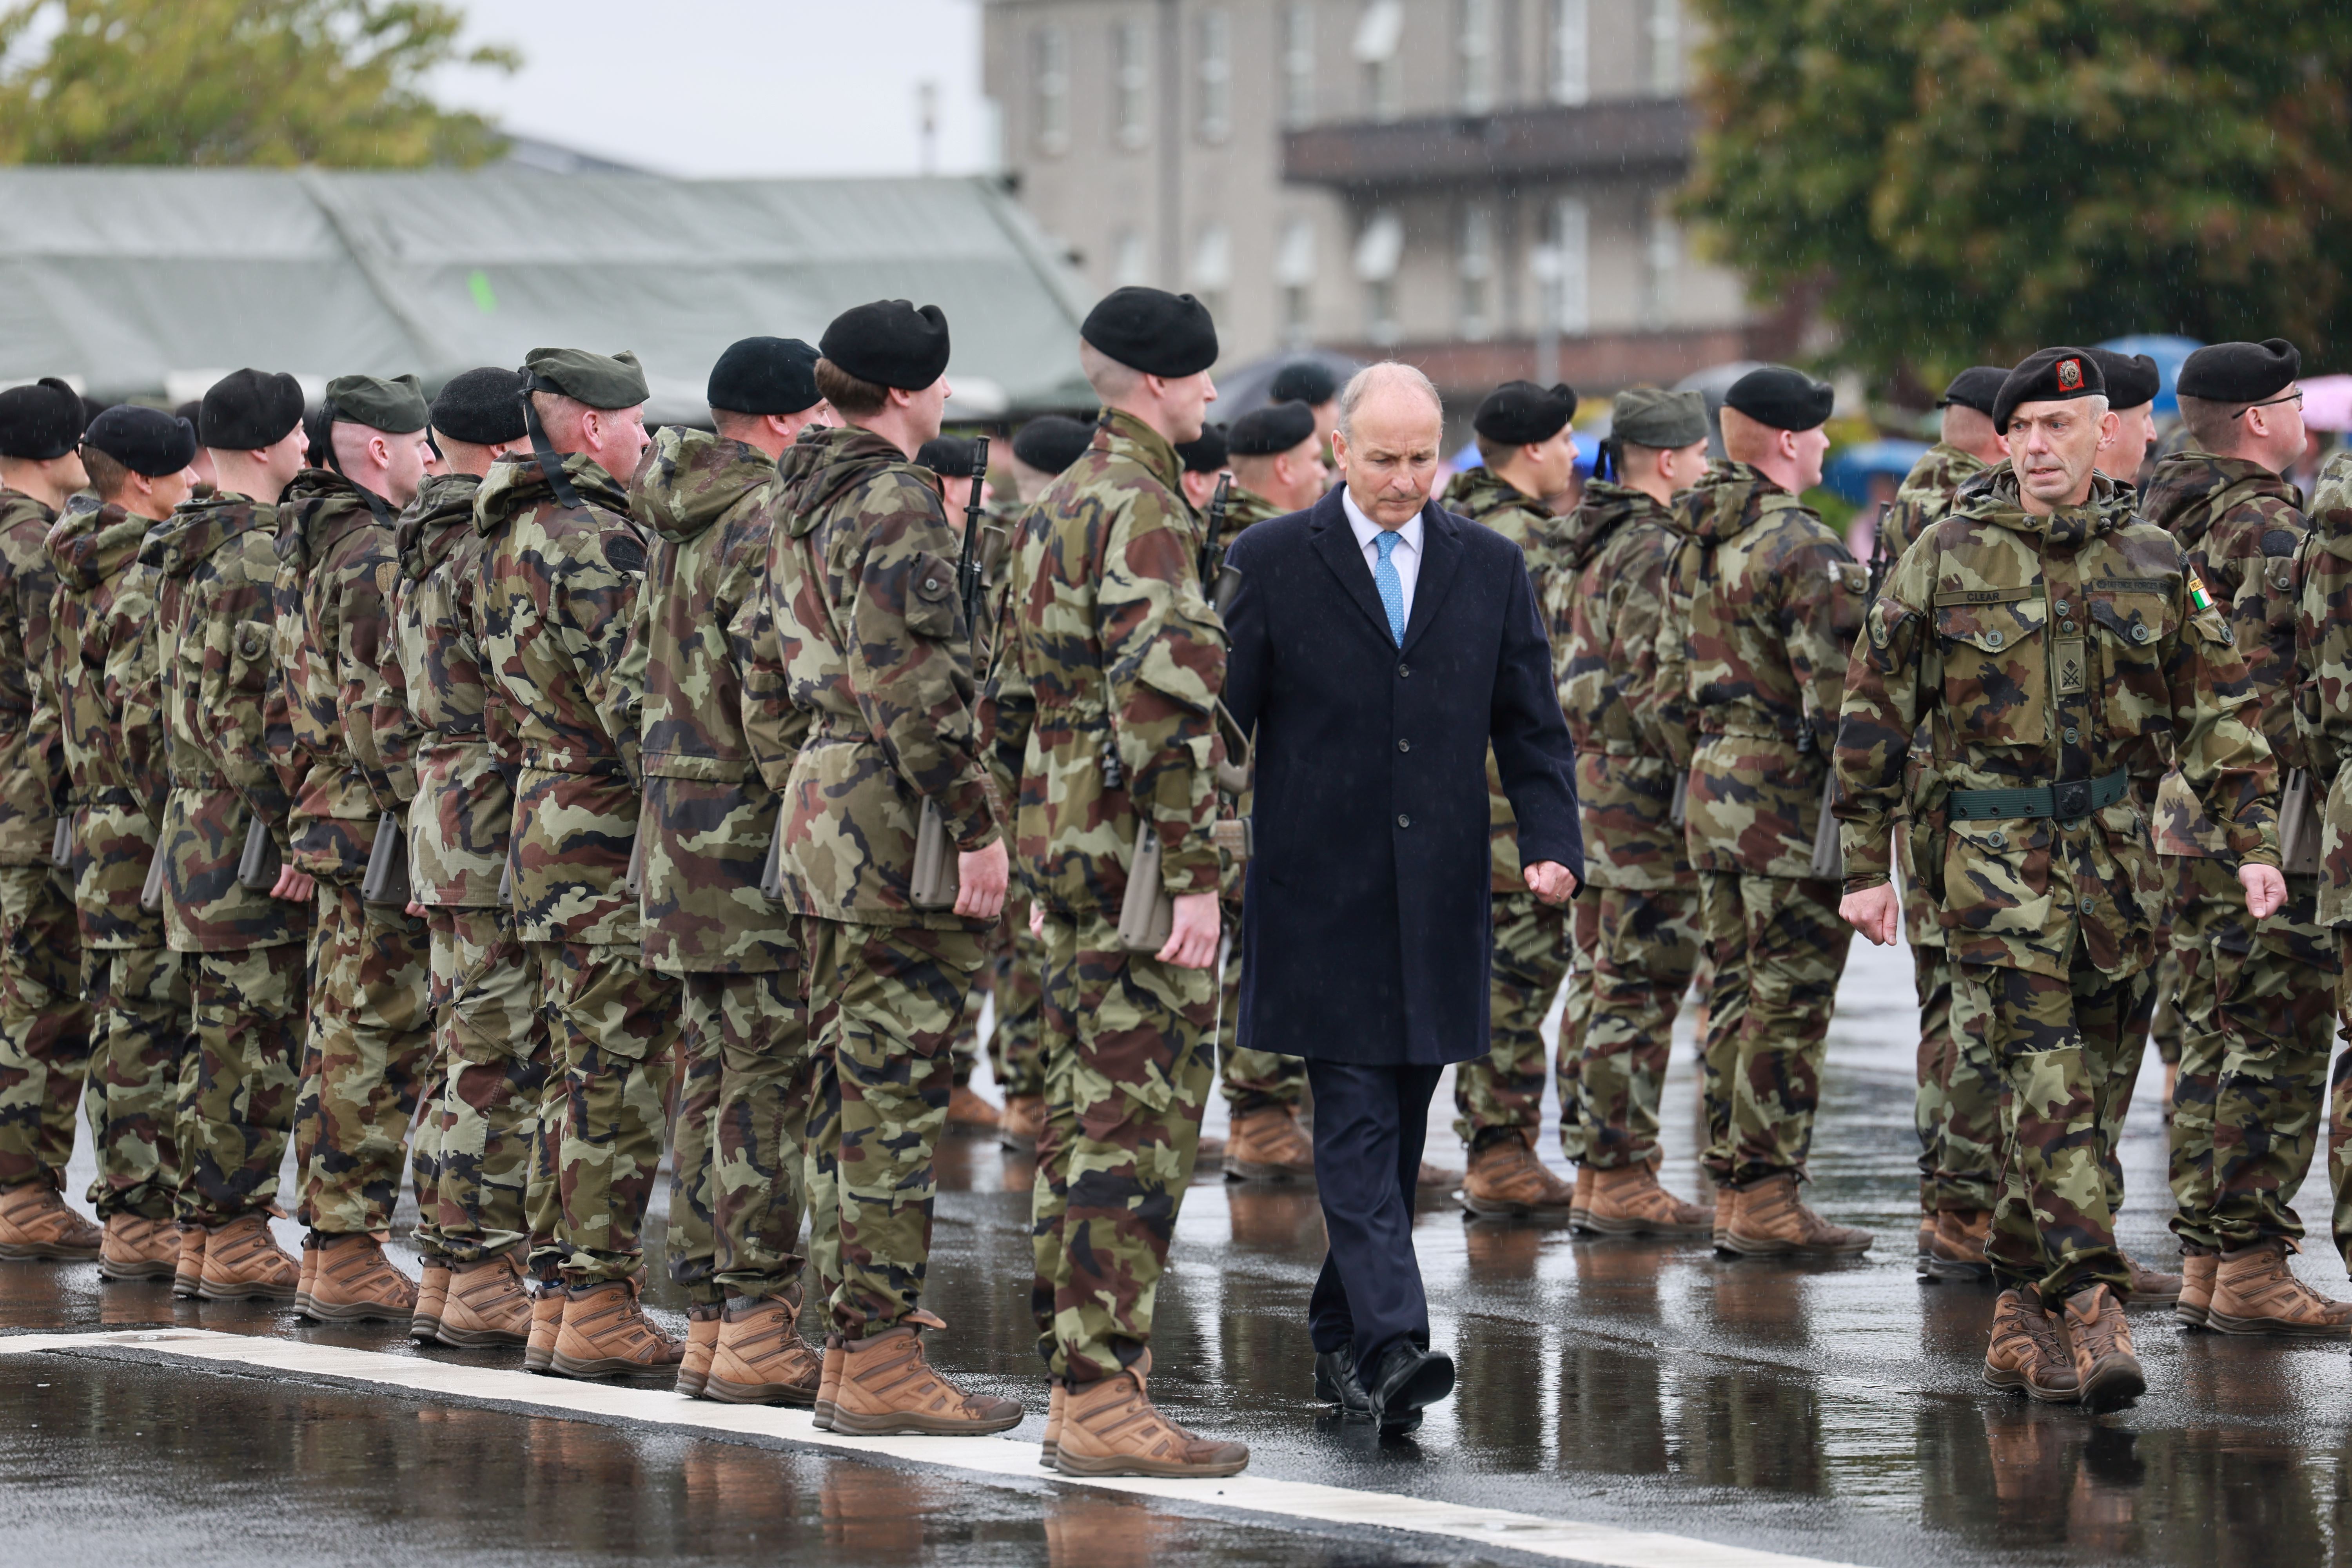 Minister-inspecting-troops-on-parade